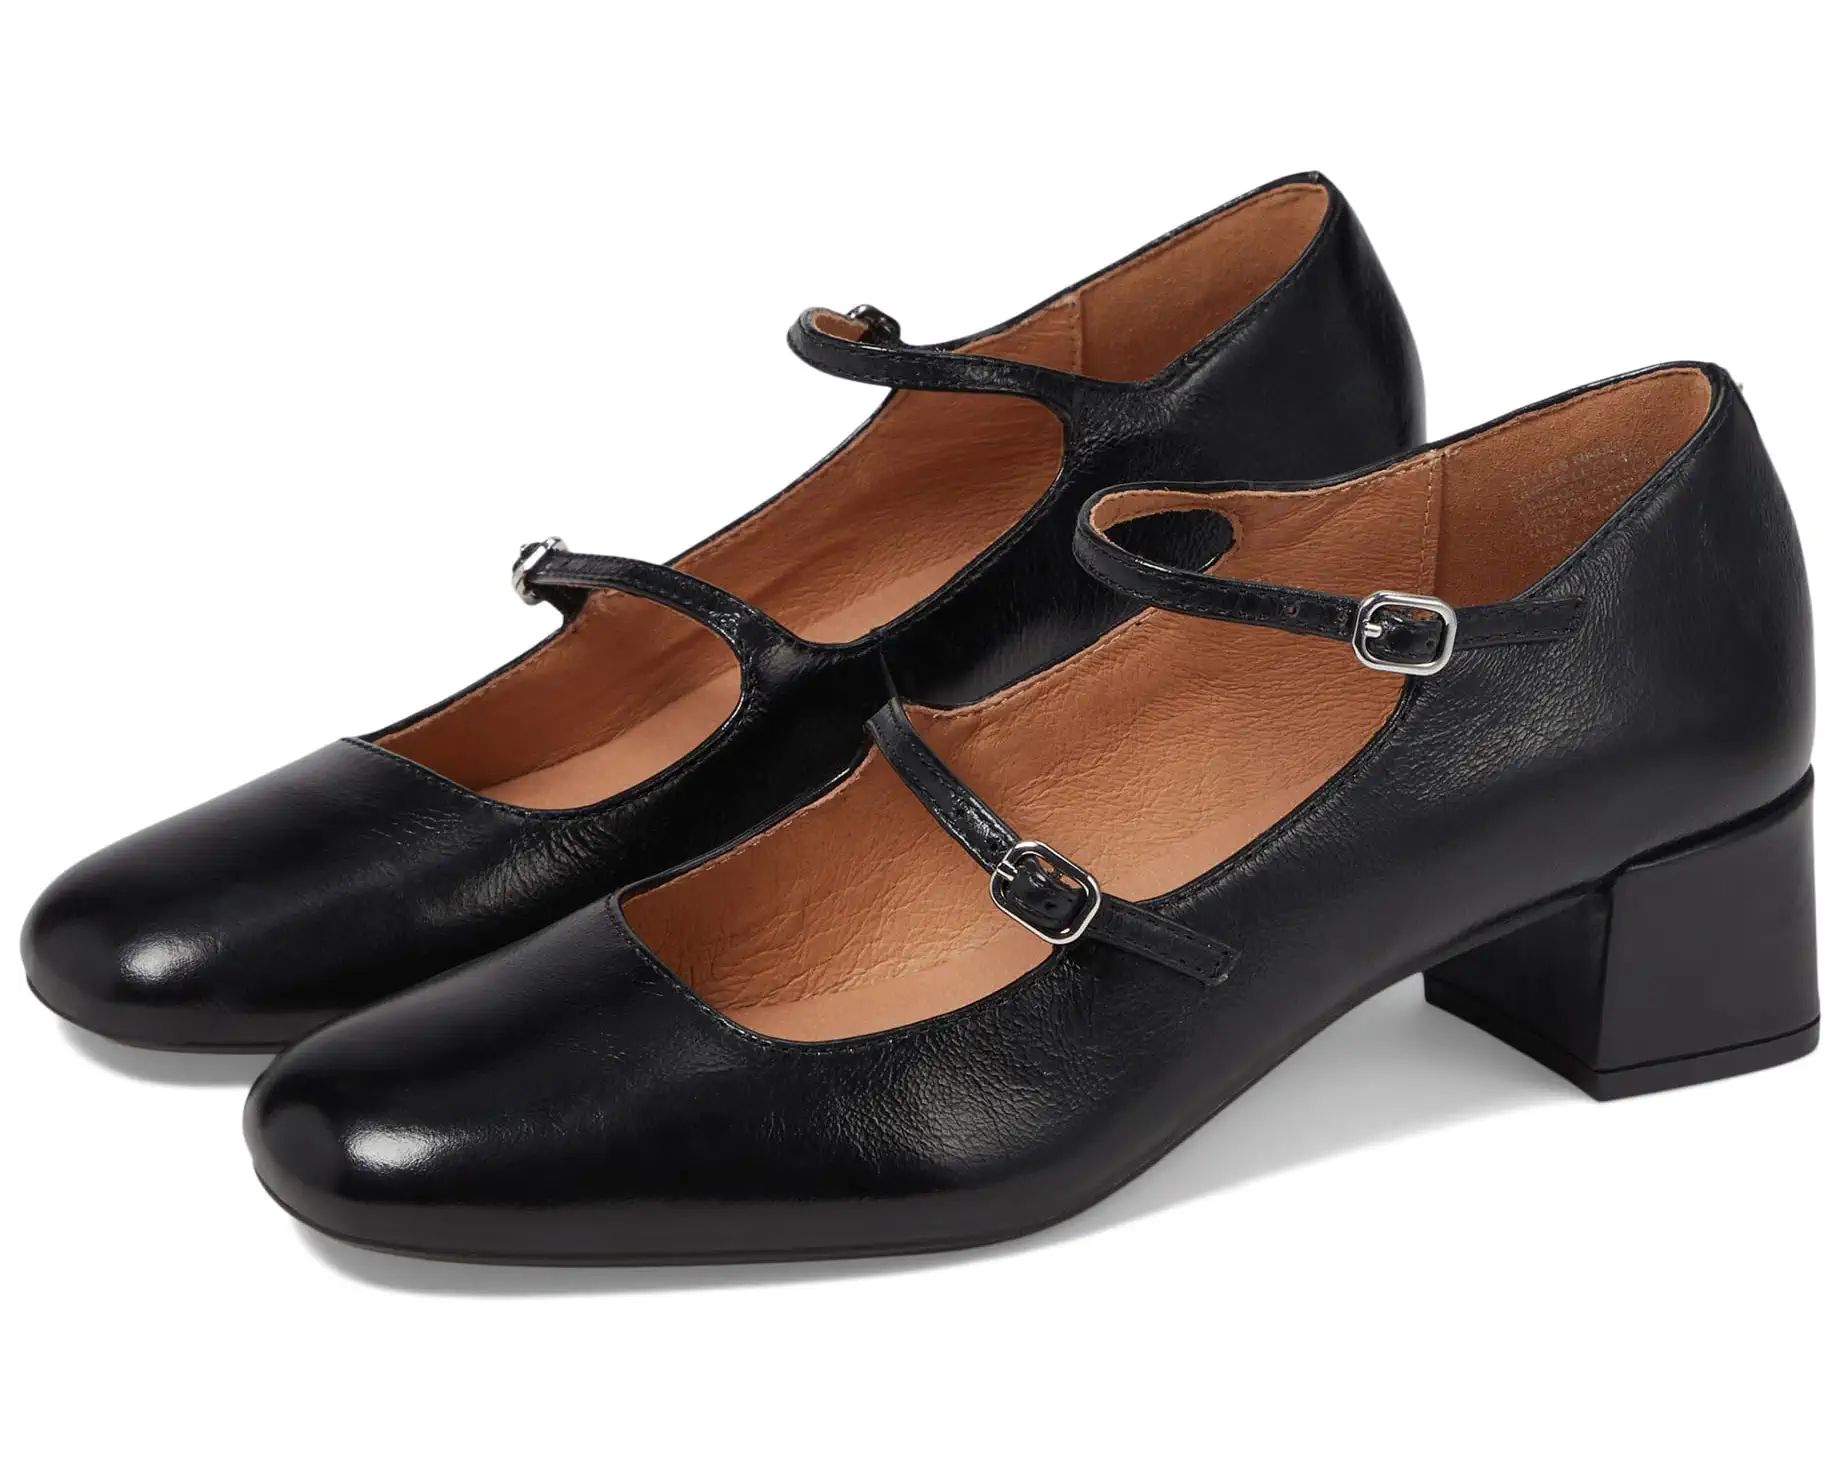 The Nettie Heeled Mary Jane in Leather | Zappos